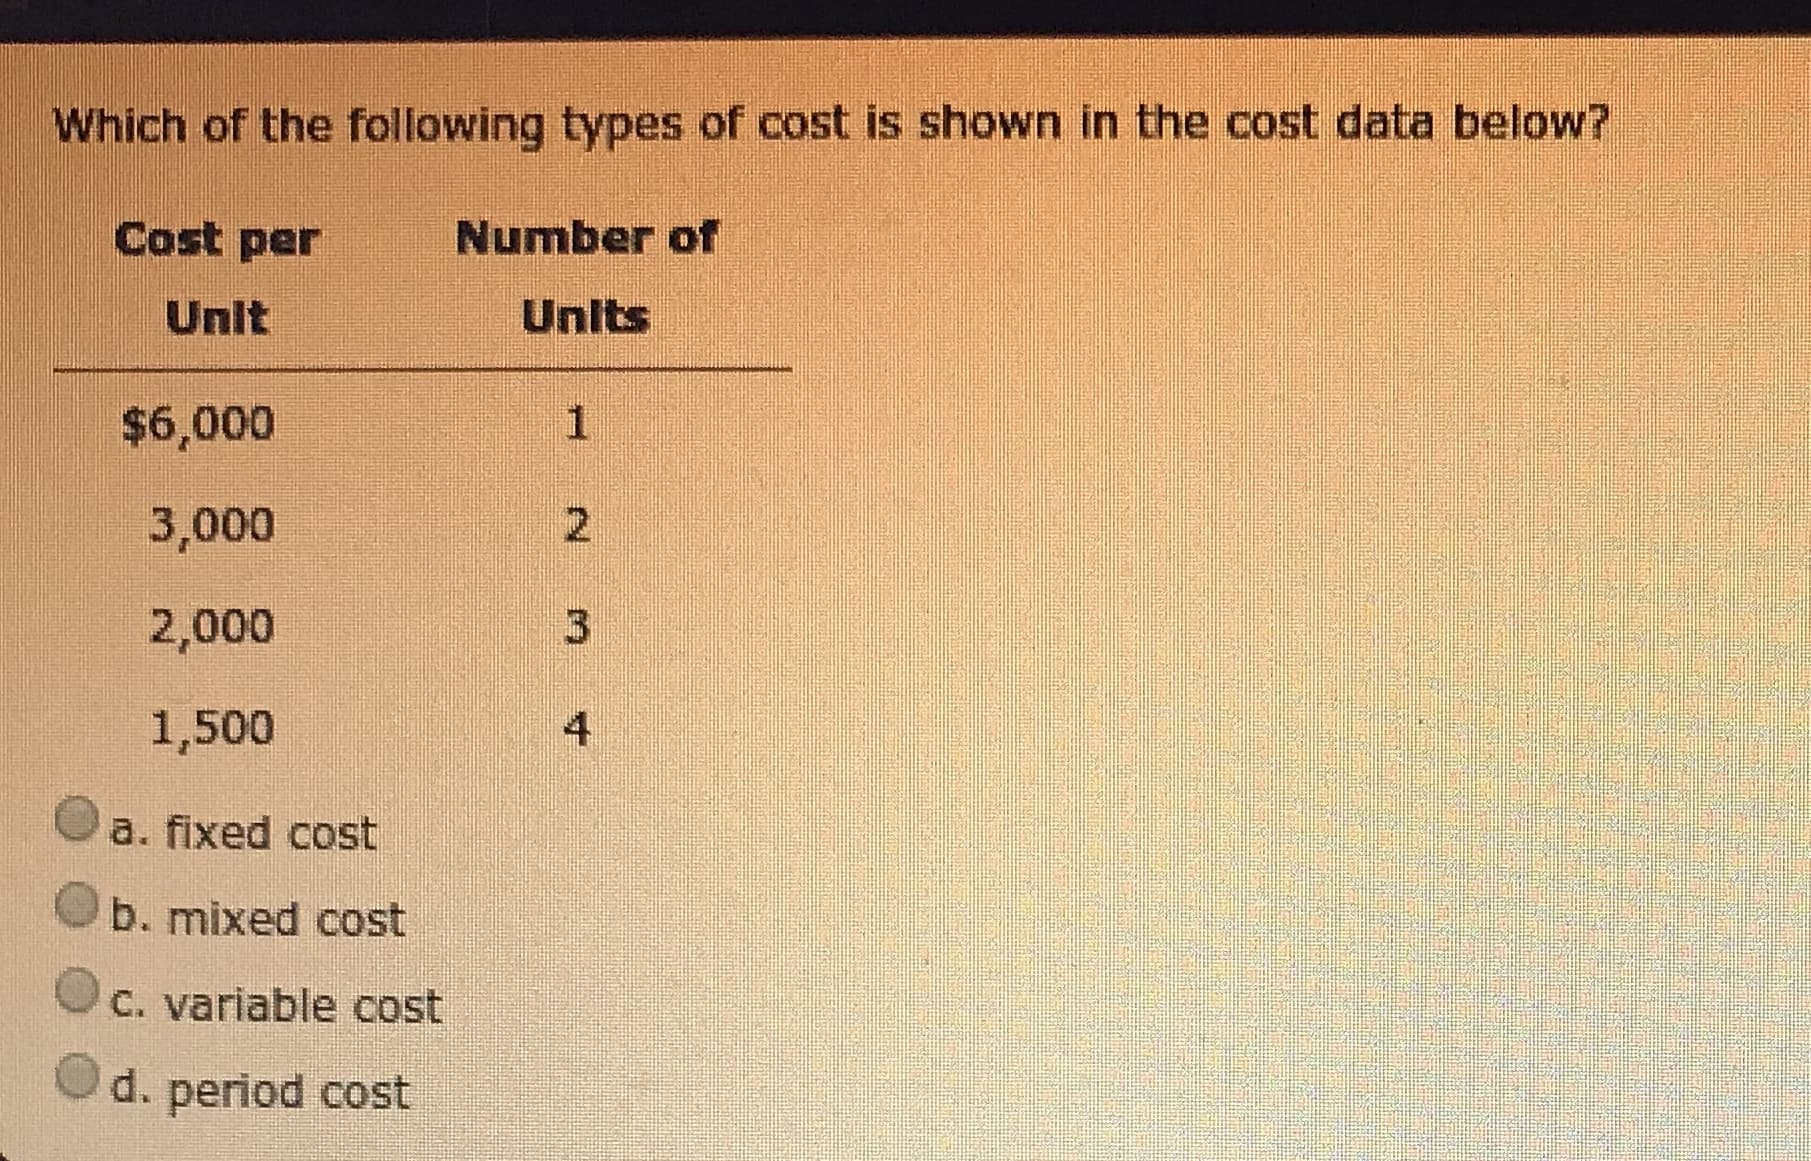 Which of the following types of cost is shown in the cost data below?
Cost per
Number of
Unit
Units
$6,000
3,000
2,000
1,500
a. fixed cost
b. mixed cost
C. variable cost
d. period cost
2.
3.
4.
